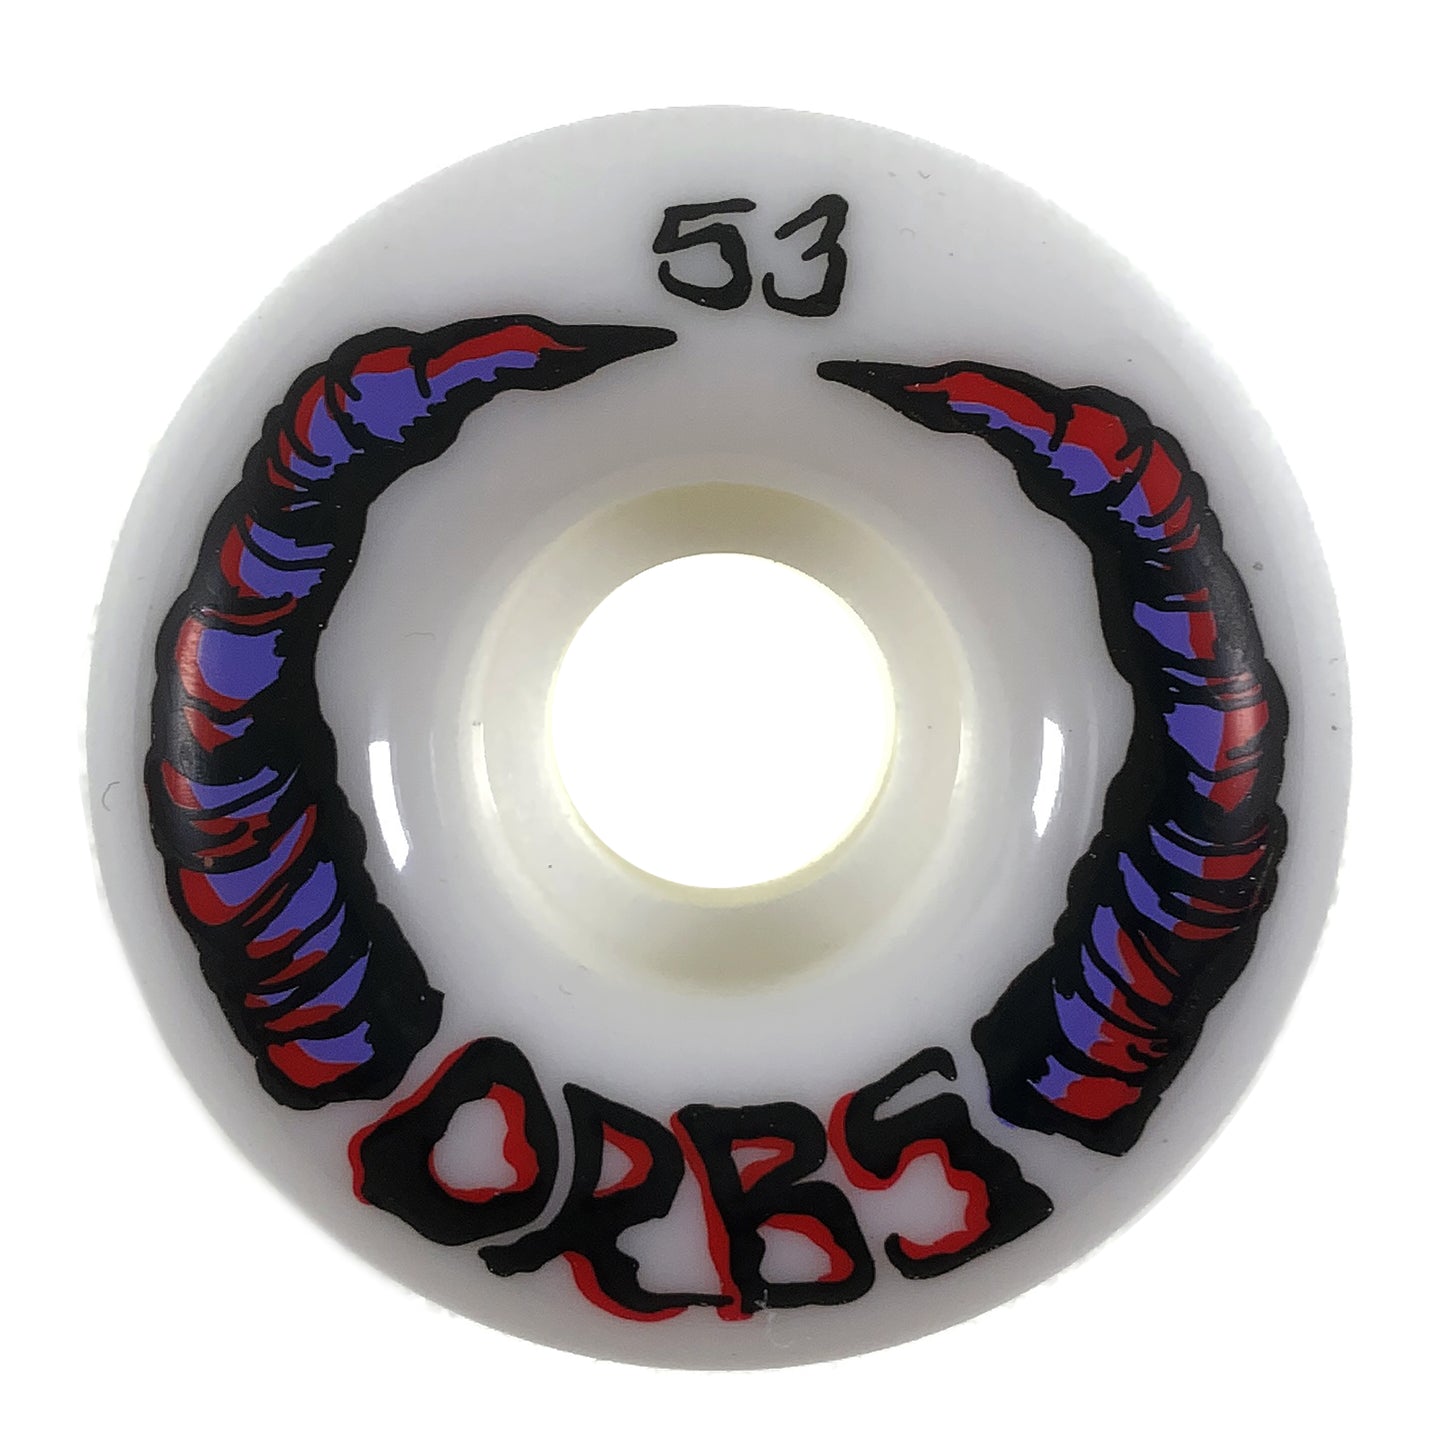 Orbs - 53mm - 99a - Apparitions - White - Prime Delux Store